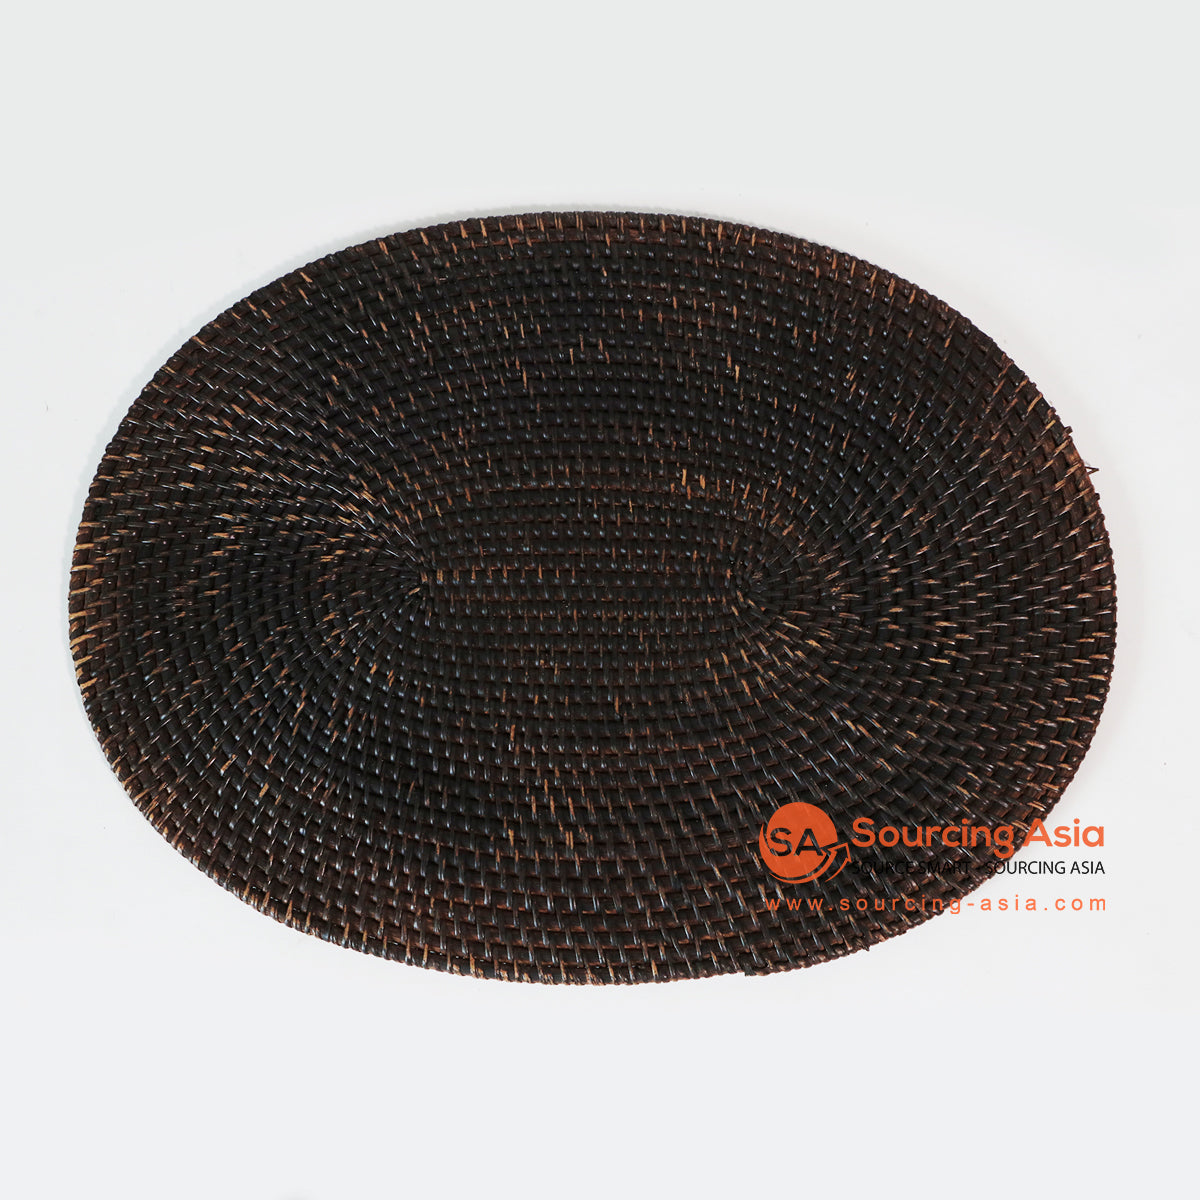 MTIC032-4 BLACK WOVEN RATTAN PLACEMAT